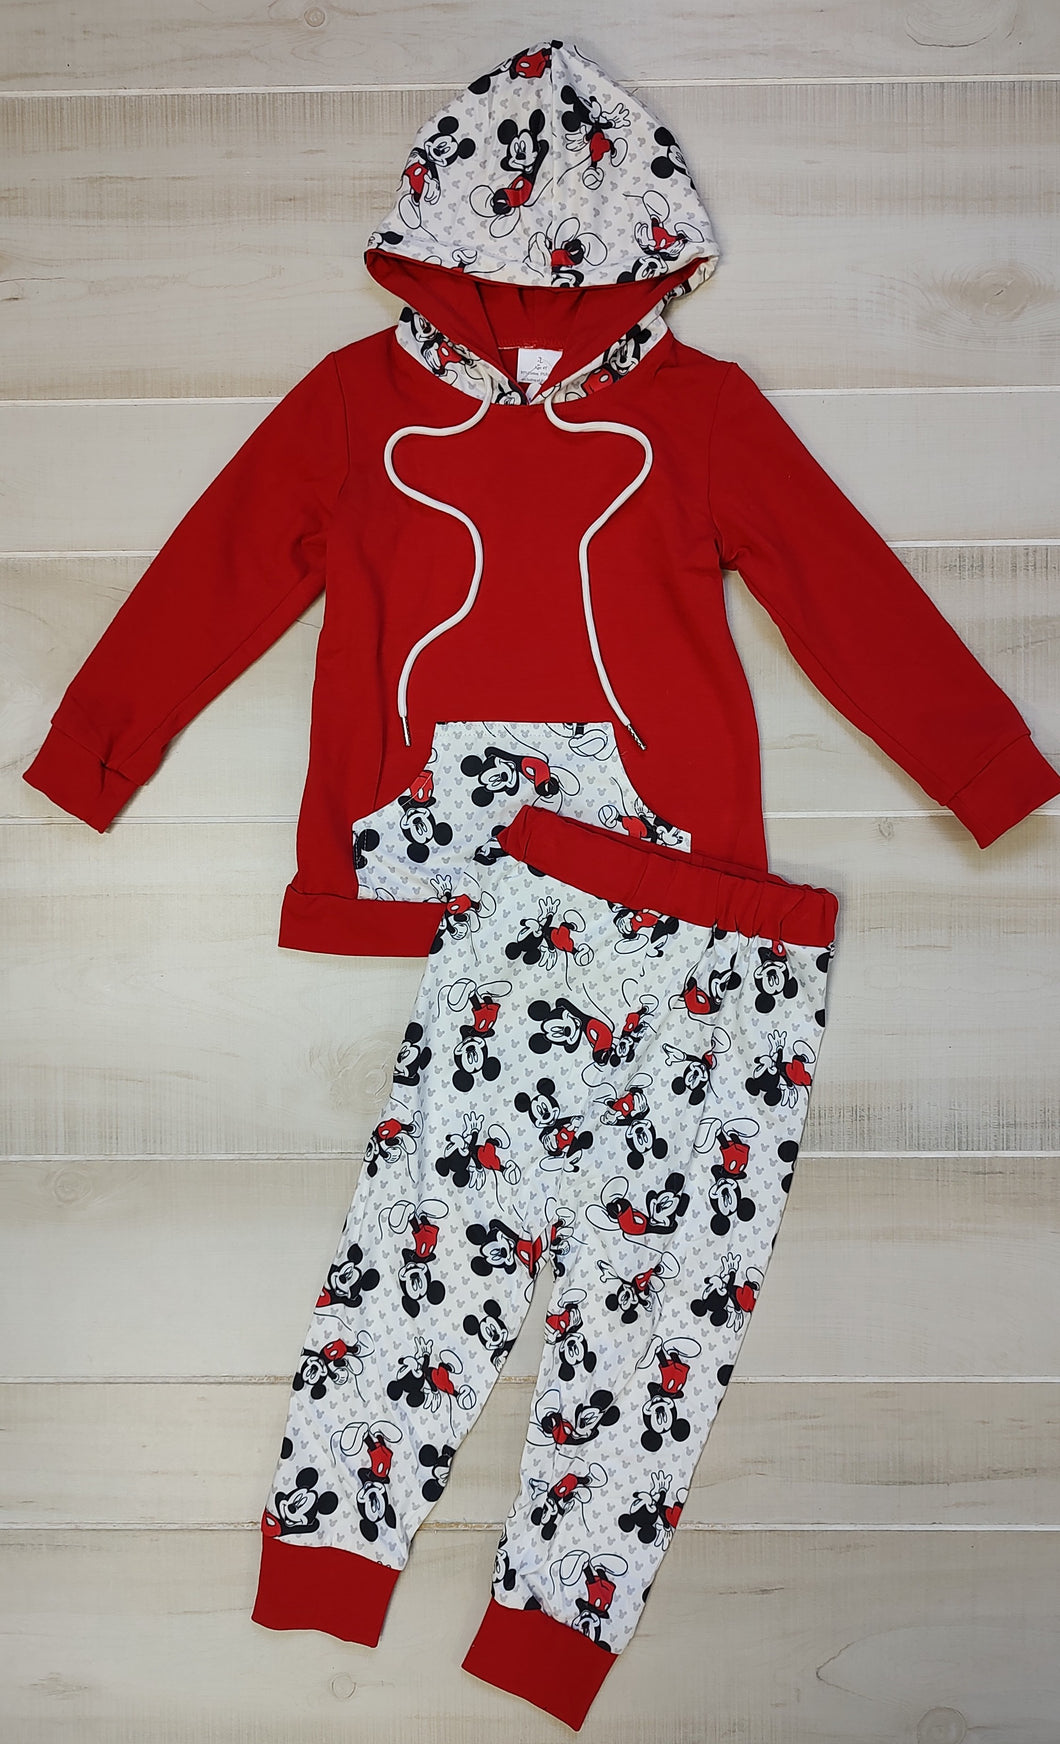 Hooded Mickey Mouse Inspired outfit